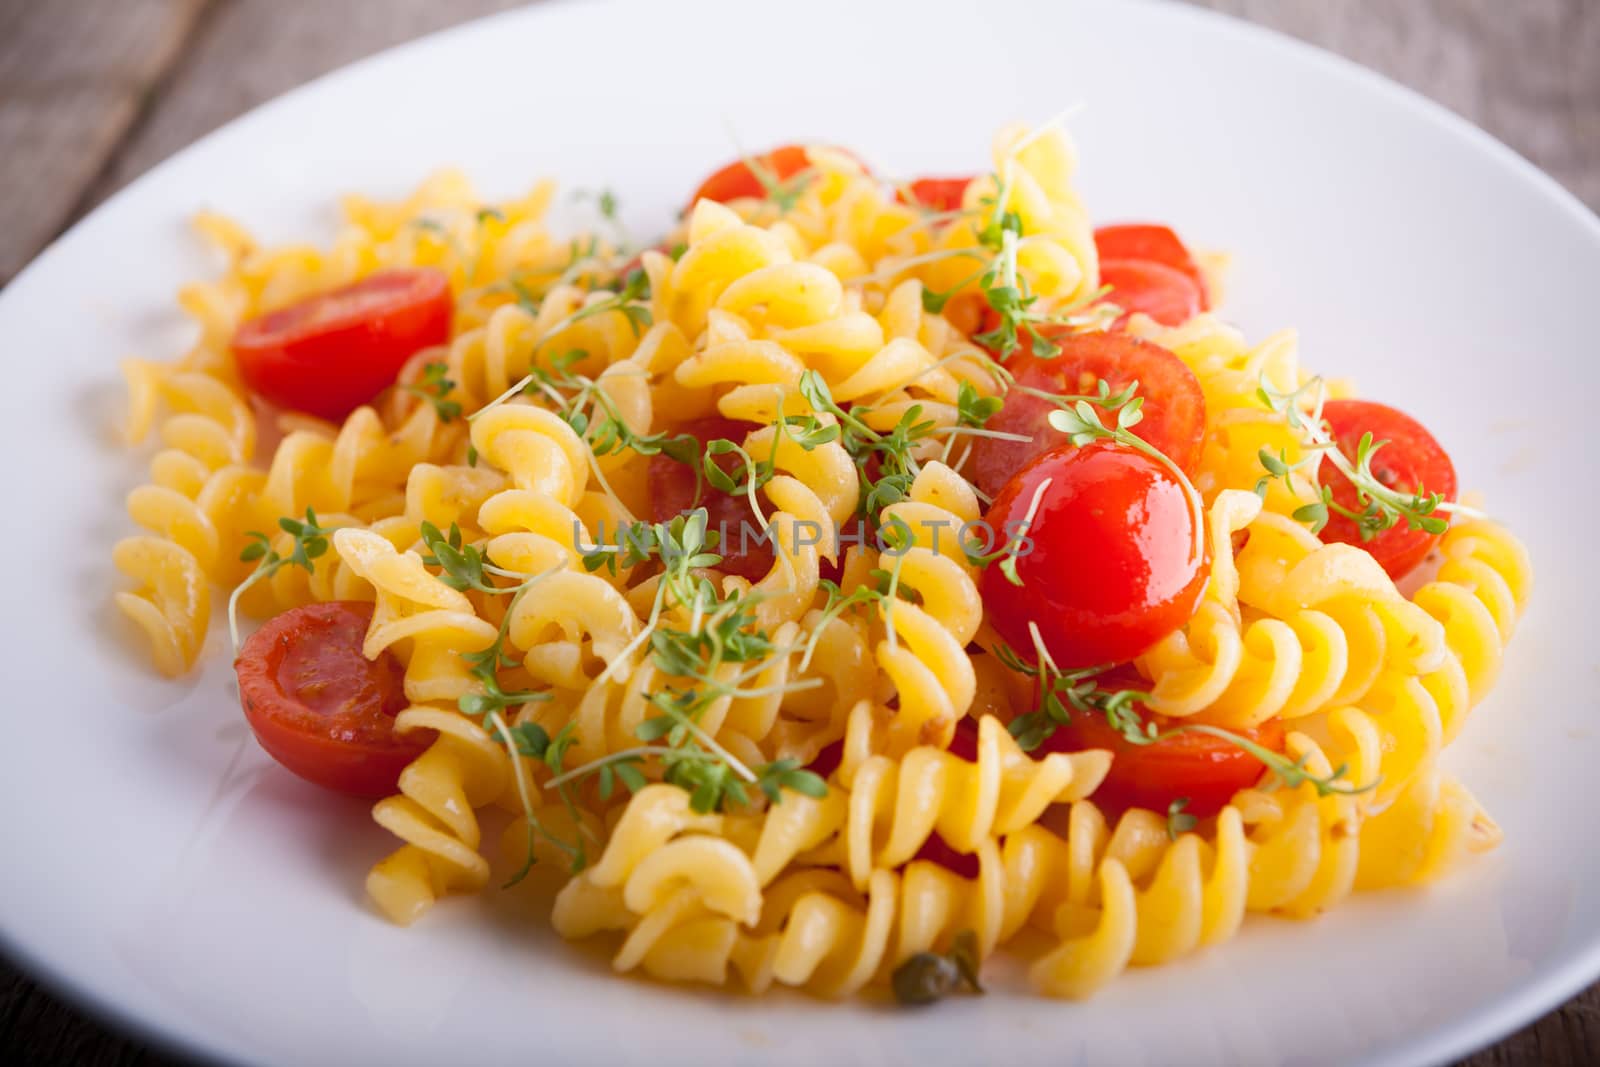 Fussili pasta with watercress and cherry tomatoes. by supercat67